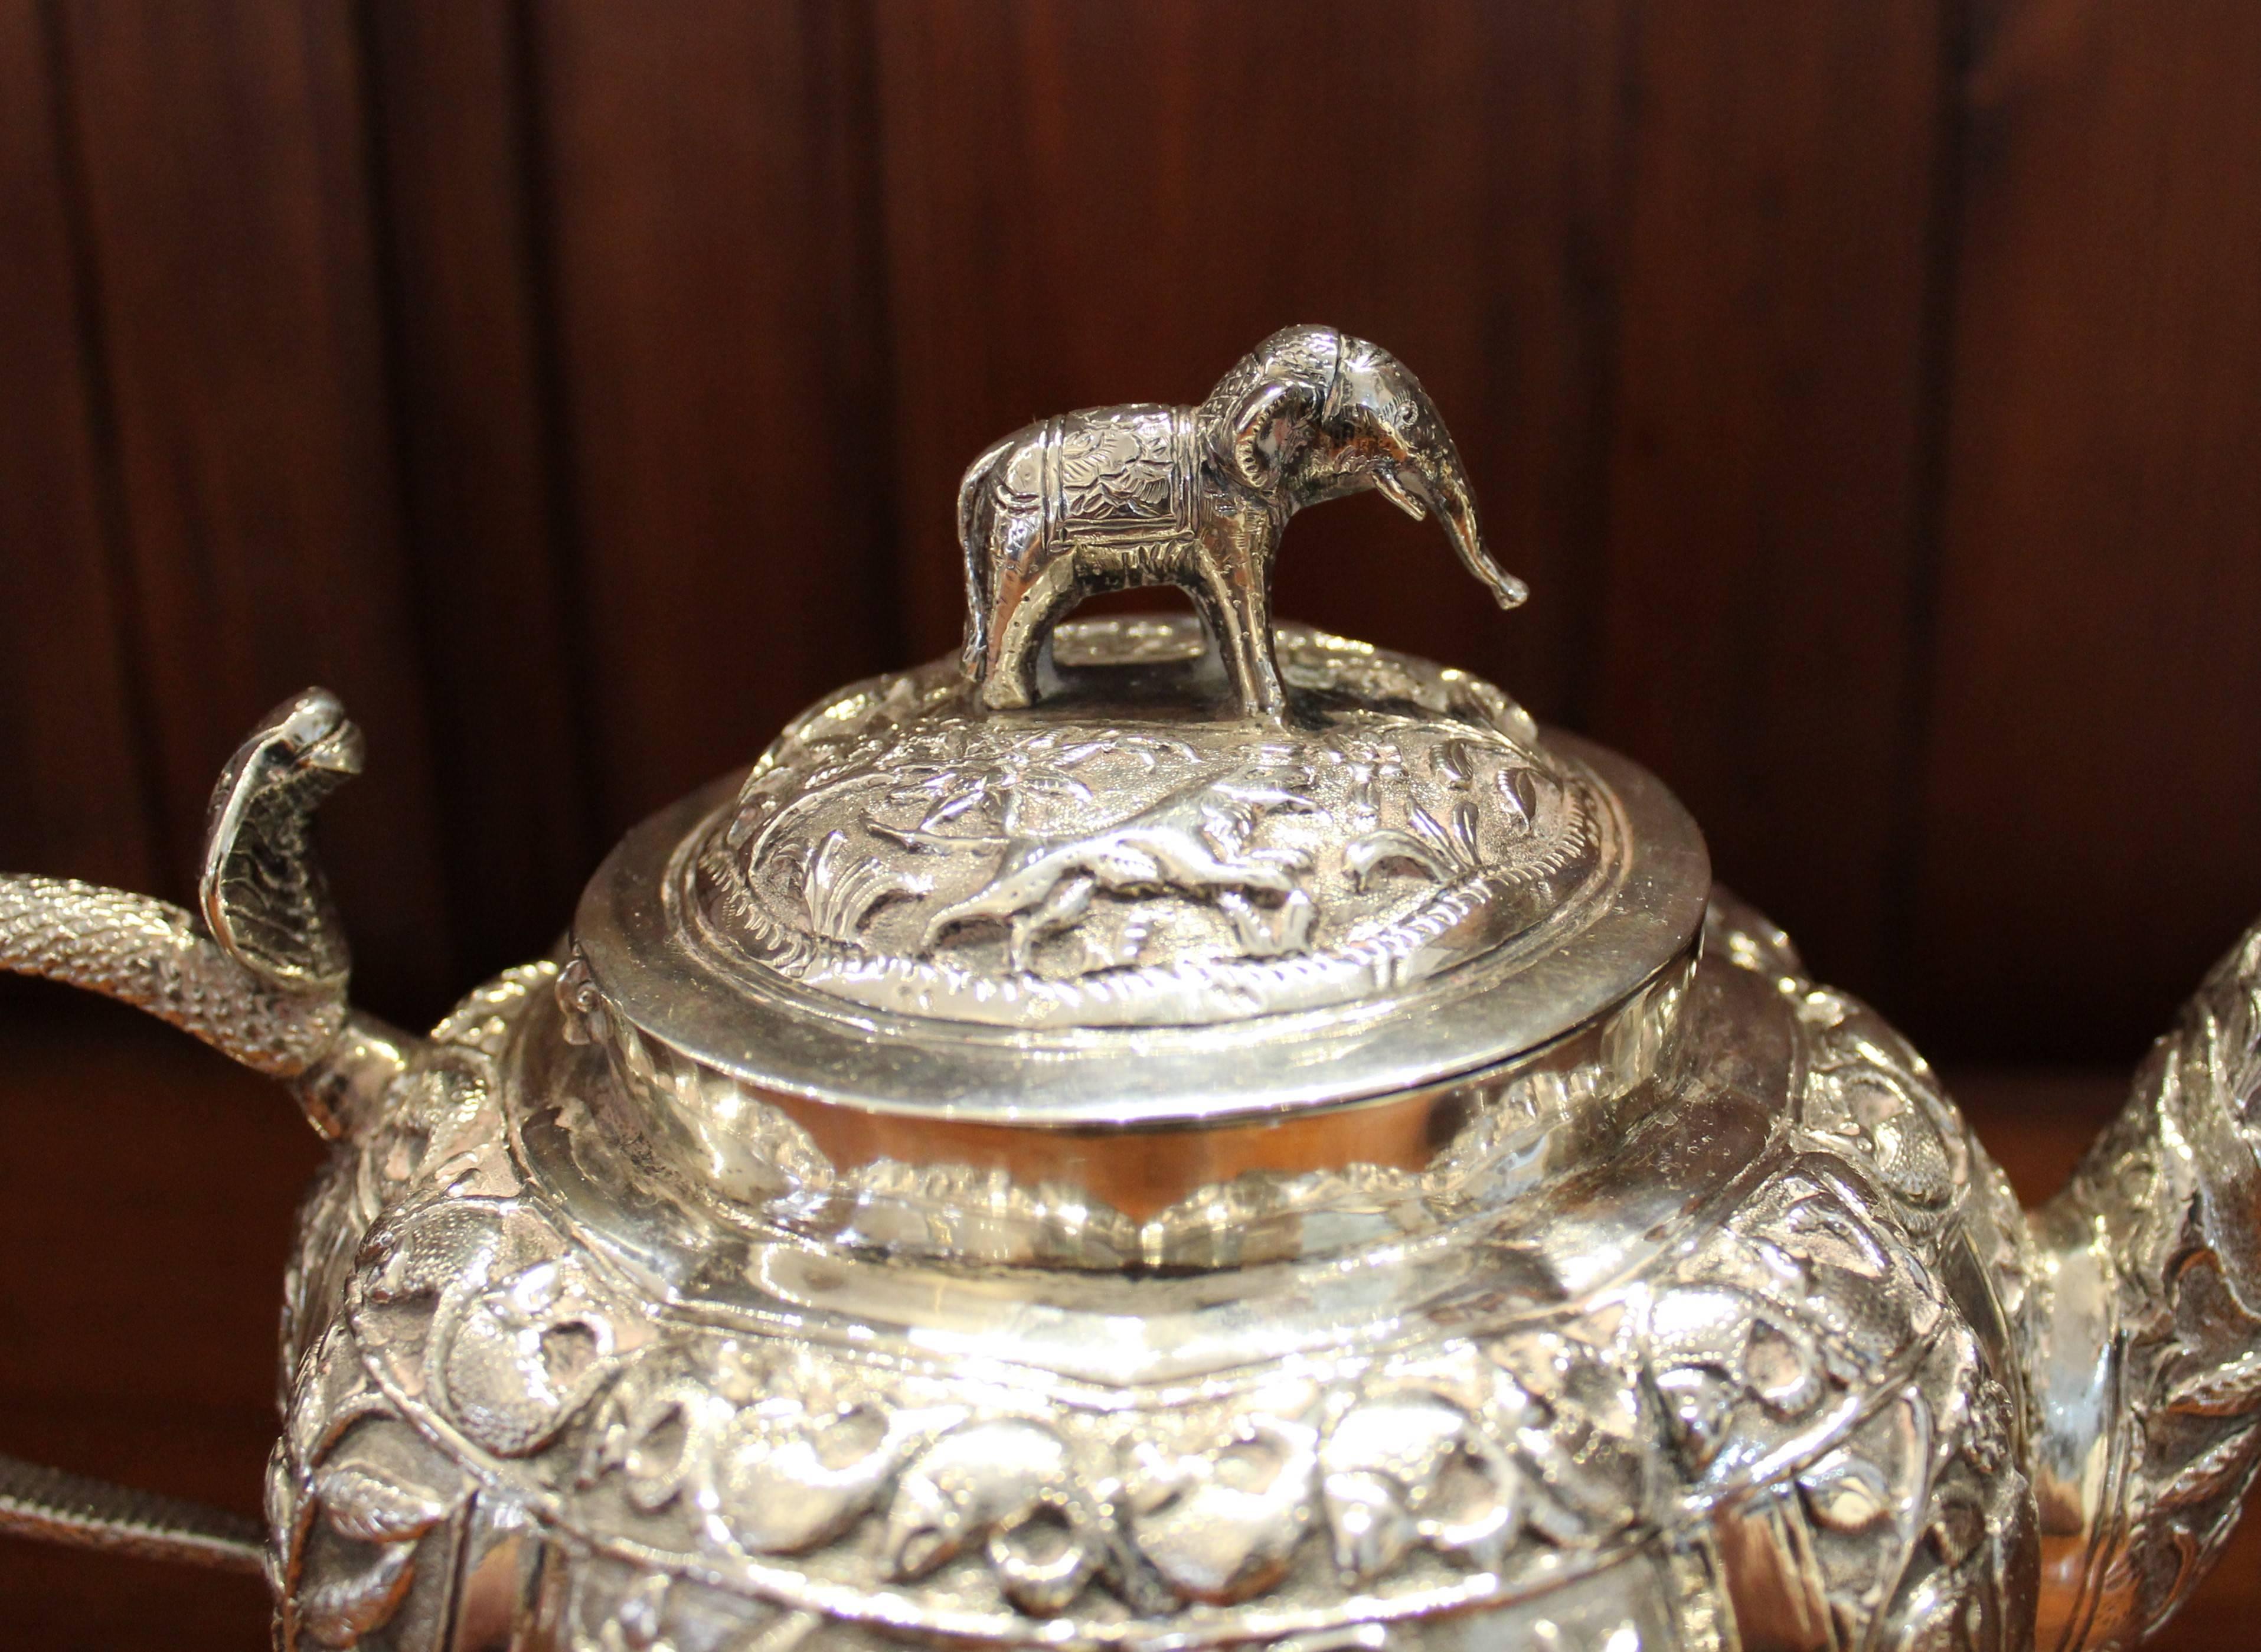 Anglo-Indian sterling silver tea pot, cream and sugar bowl. This tea service is worked in brilliant répoussé and chasing. It features an array of animals, fish, foliage and figures throughout. The teapot has a richly detailed standing-elephant